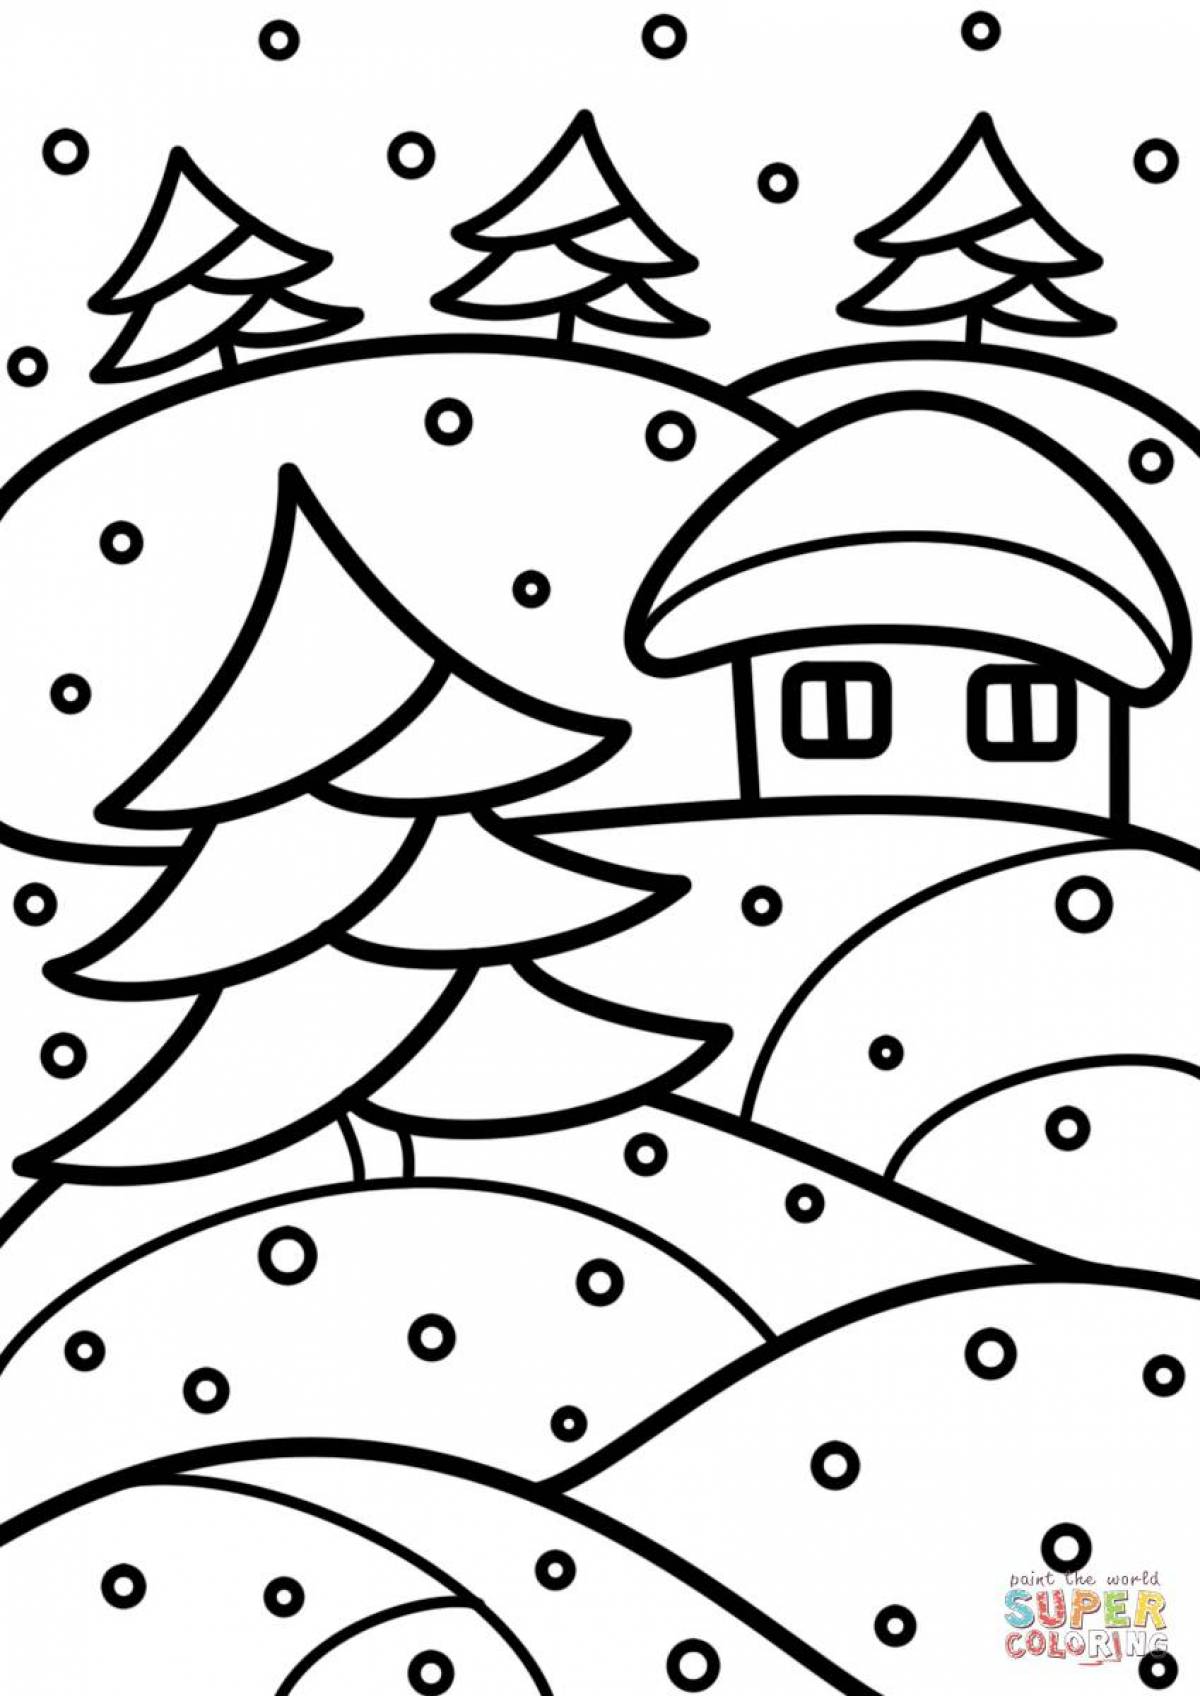 Delightful winter coloring book for 3-4 year olds